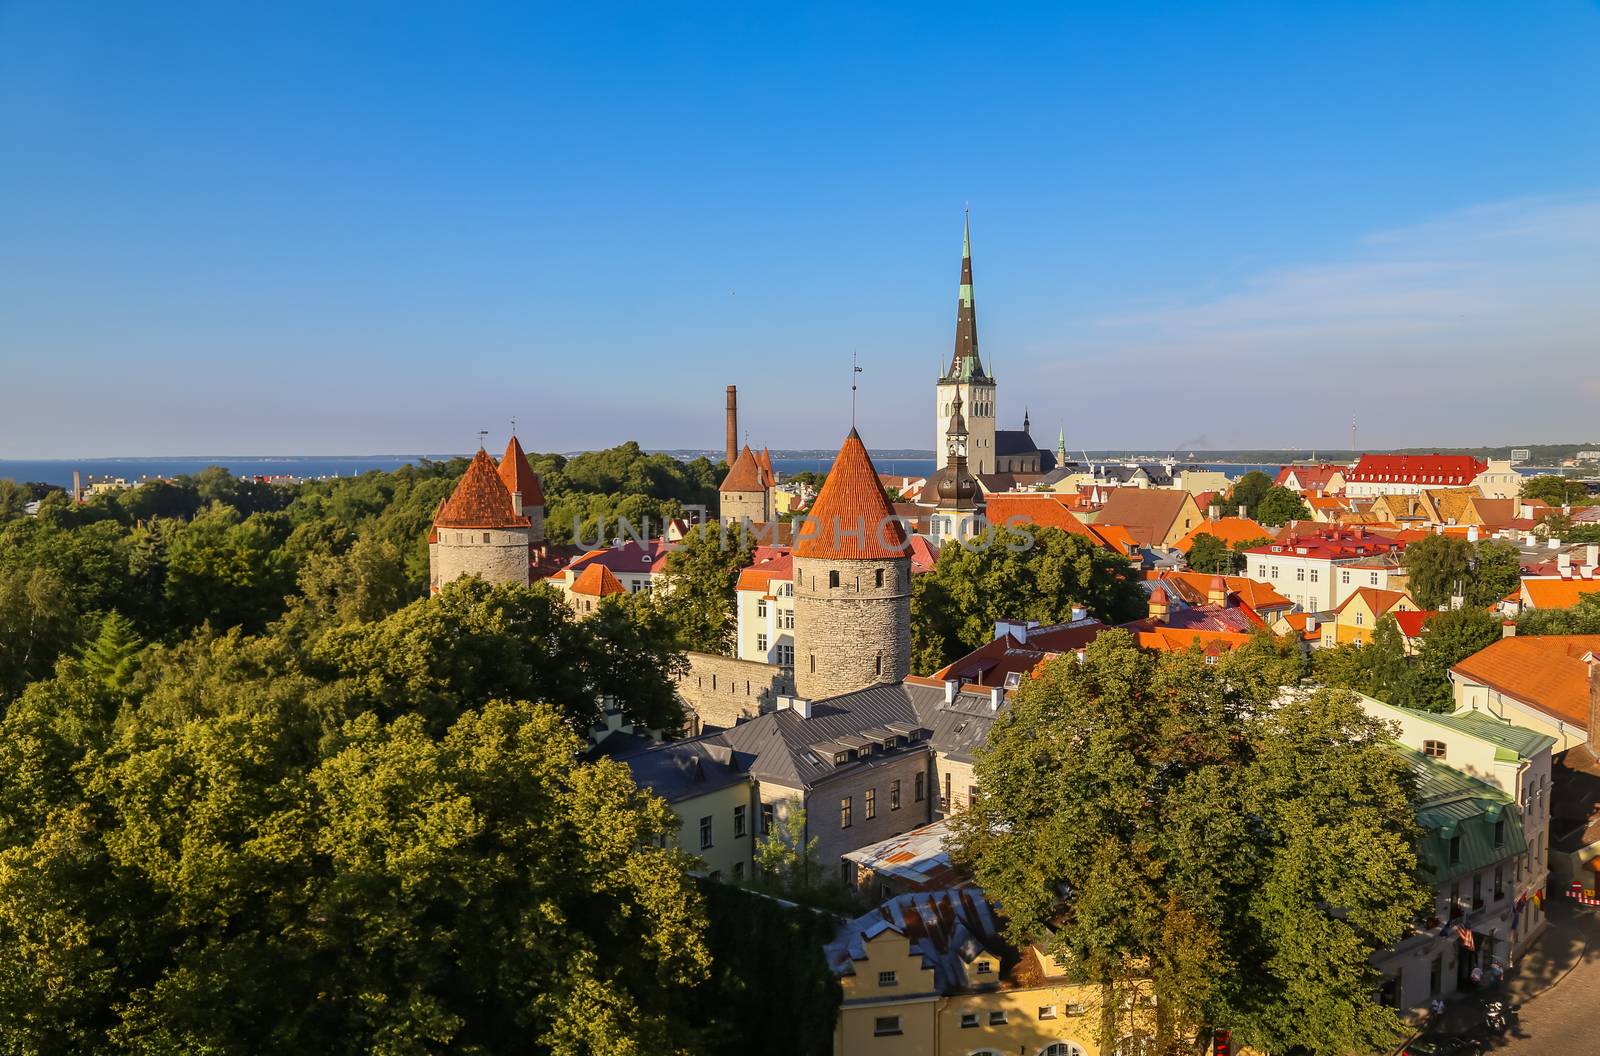 Tallinn, Estonia.Top view of the old town in the summer